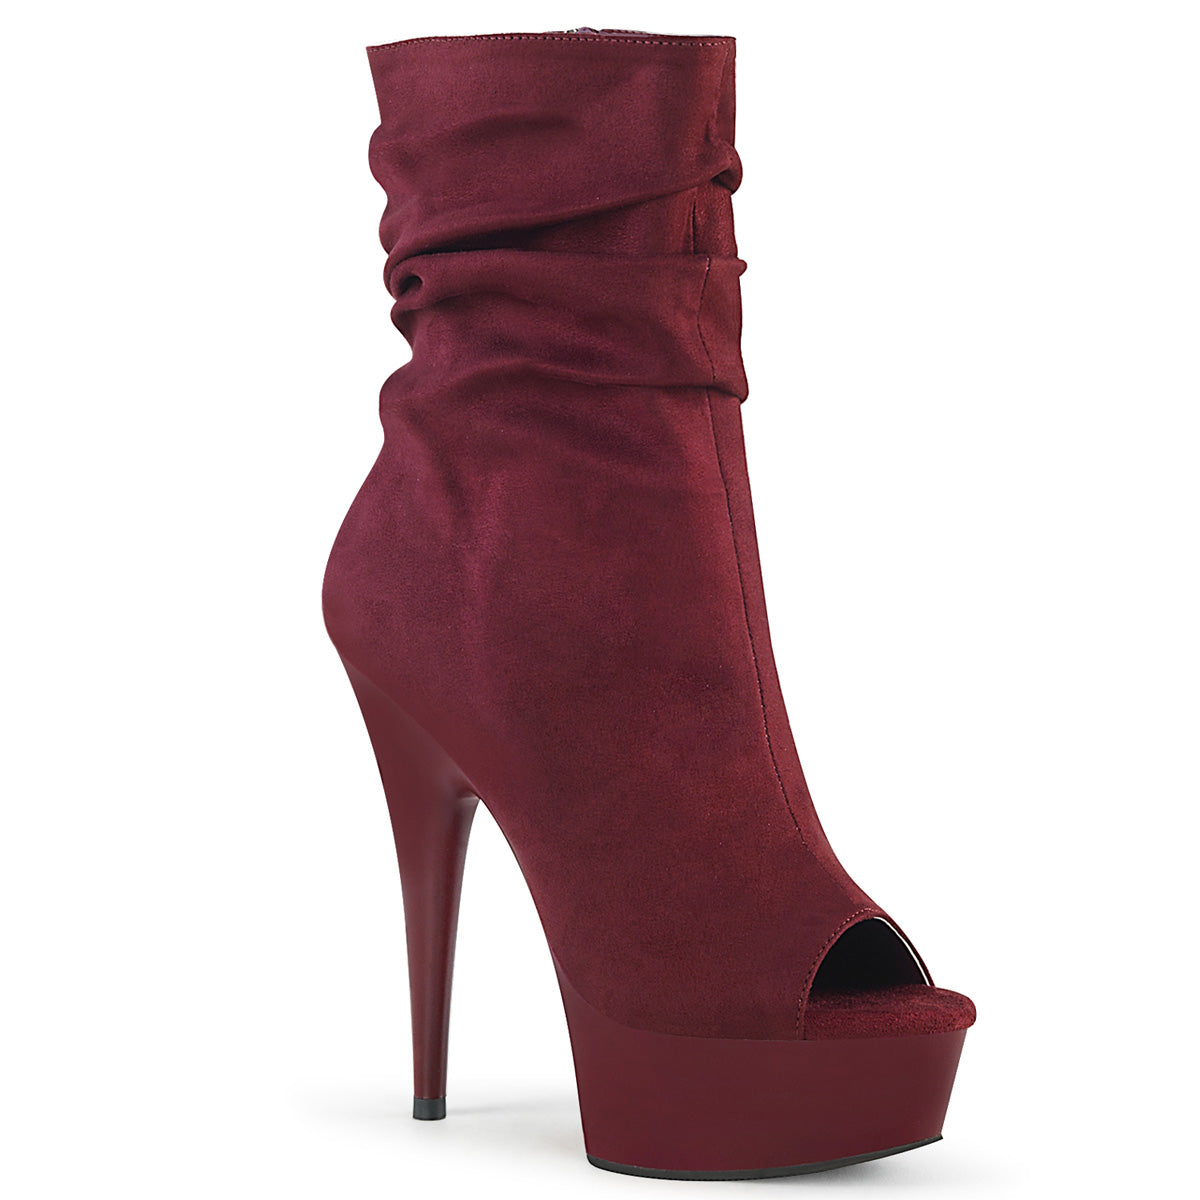 DELIGHT-1031 Burgundy Faux Suede/Burgundy Matte Ankle Boot Pleaser